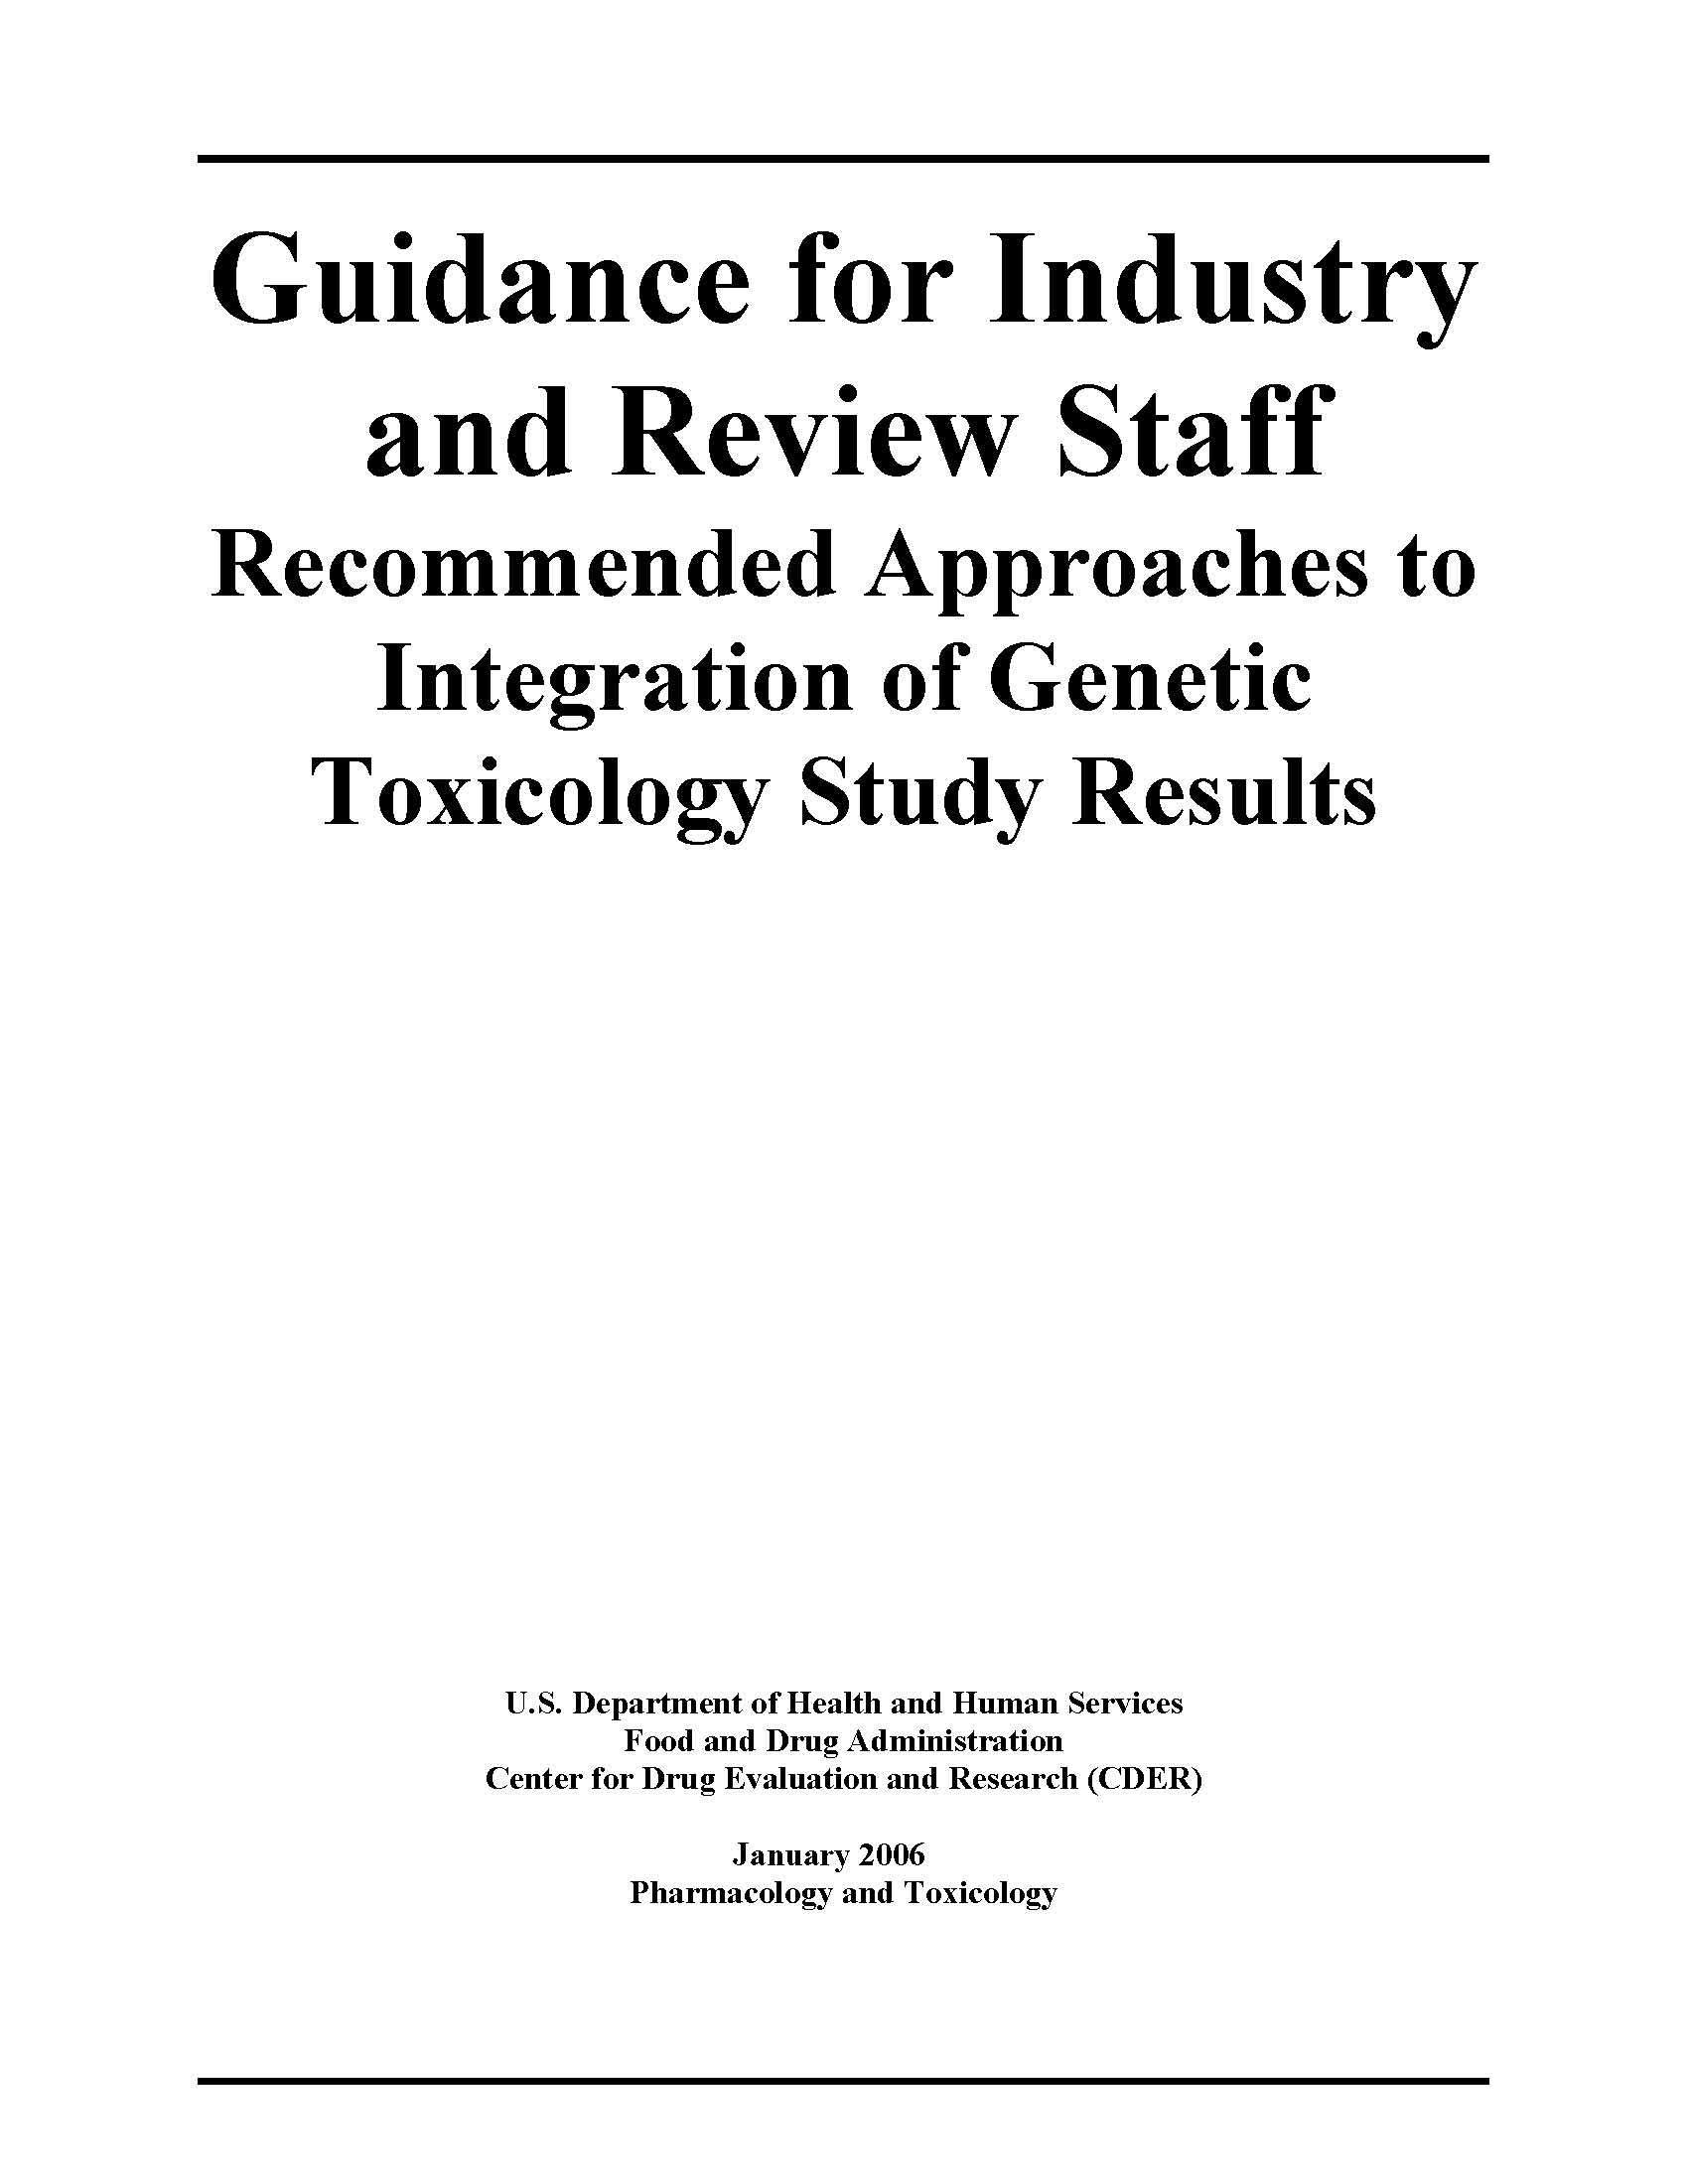 Guidance for Industry and Review Staff